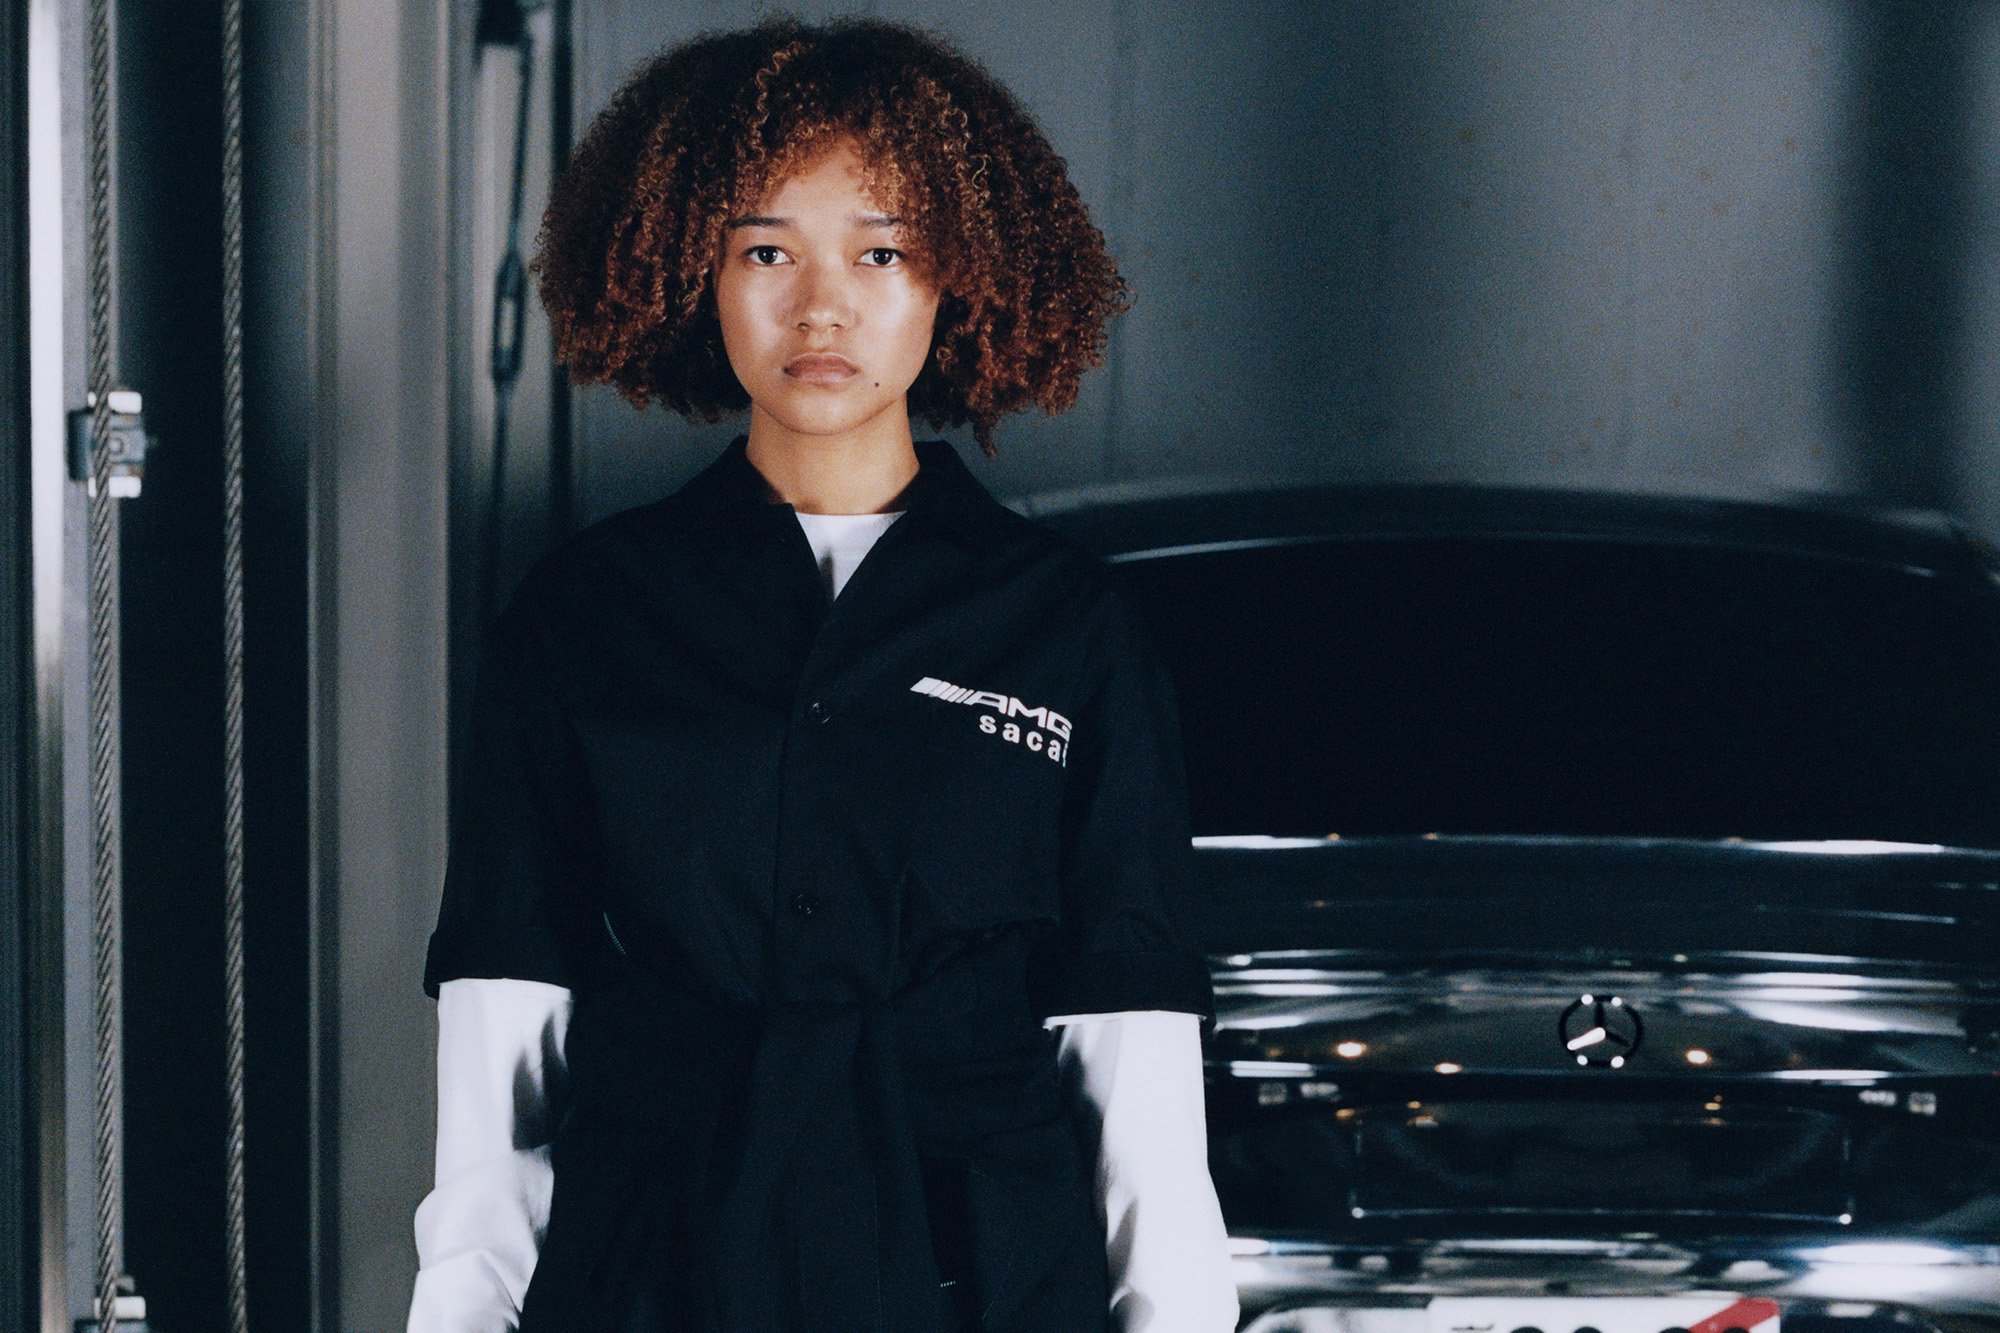 The capsule collection of Mercedes-AMG and Japanese fashion house sacai